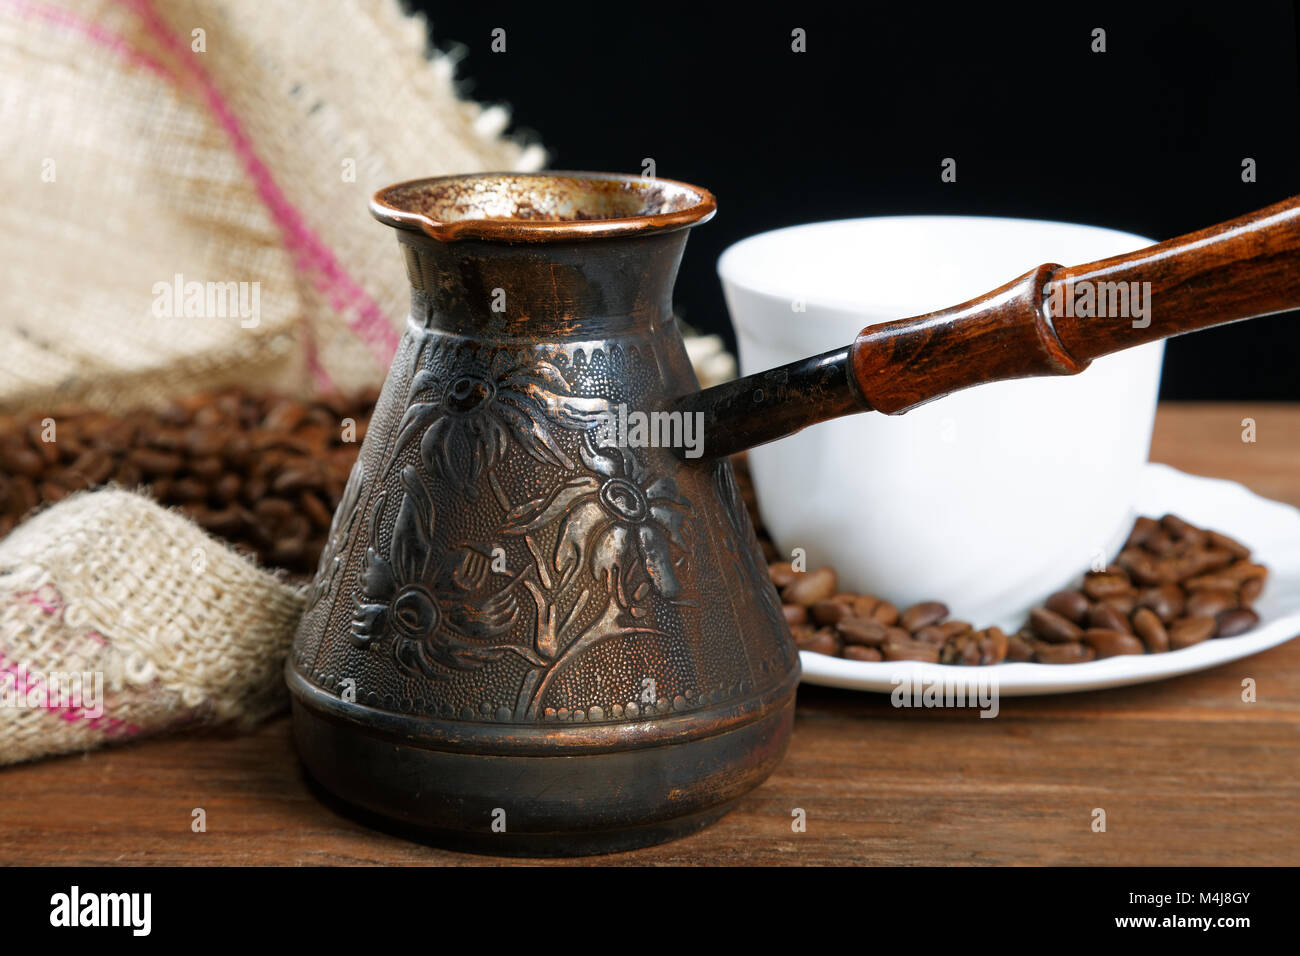 https://c8.alamy.com/comp/M4J8GY/turka-with-coffee-on-the-table-next-to-coffee-beans-M4J8GY.jpg